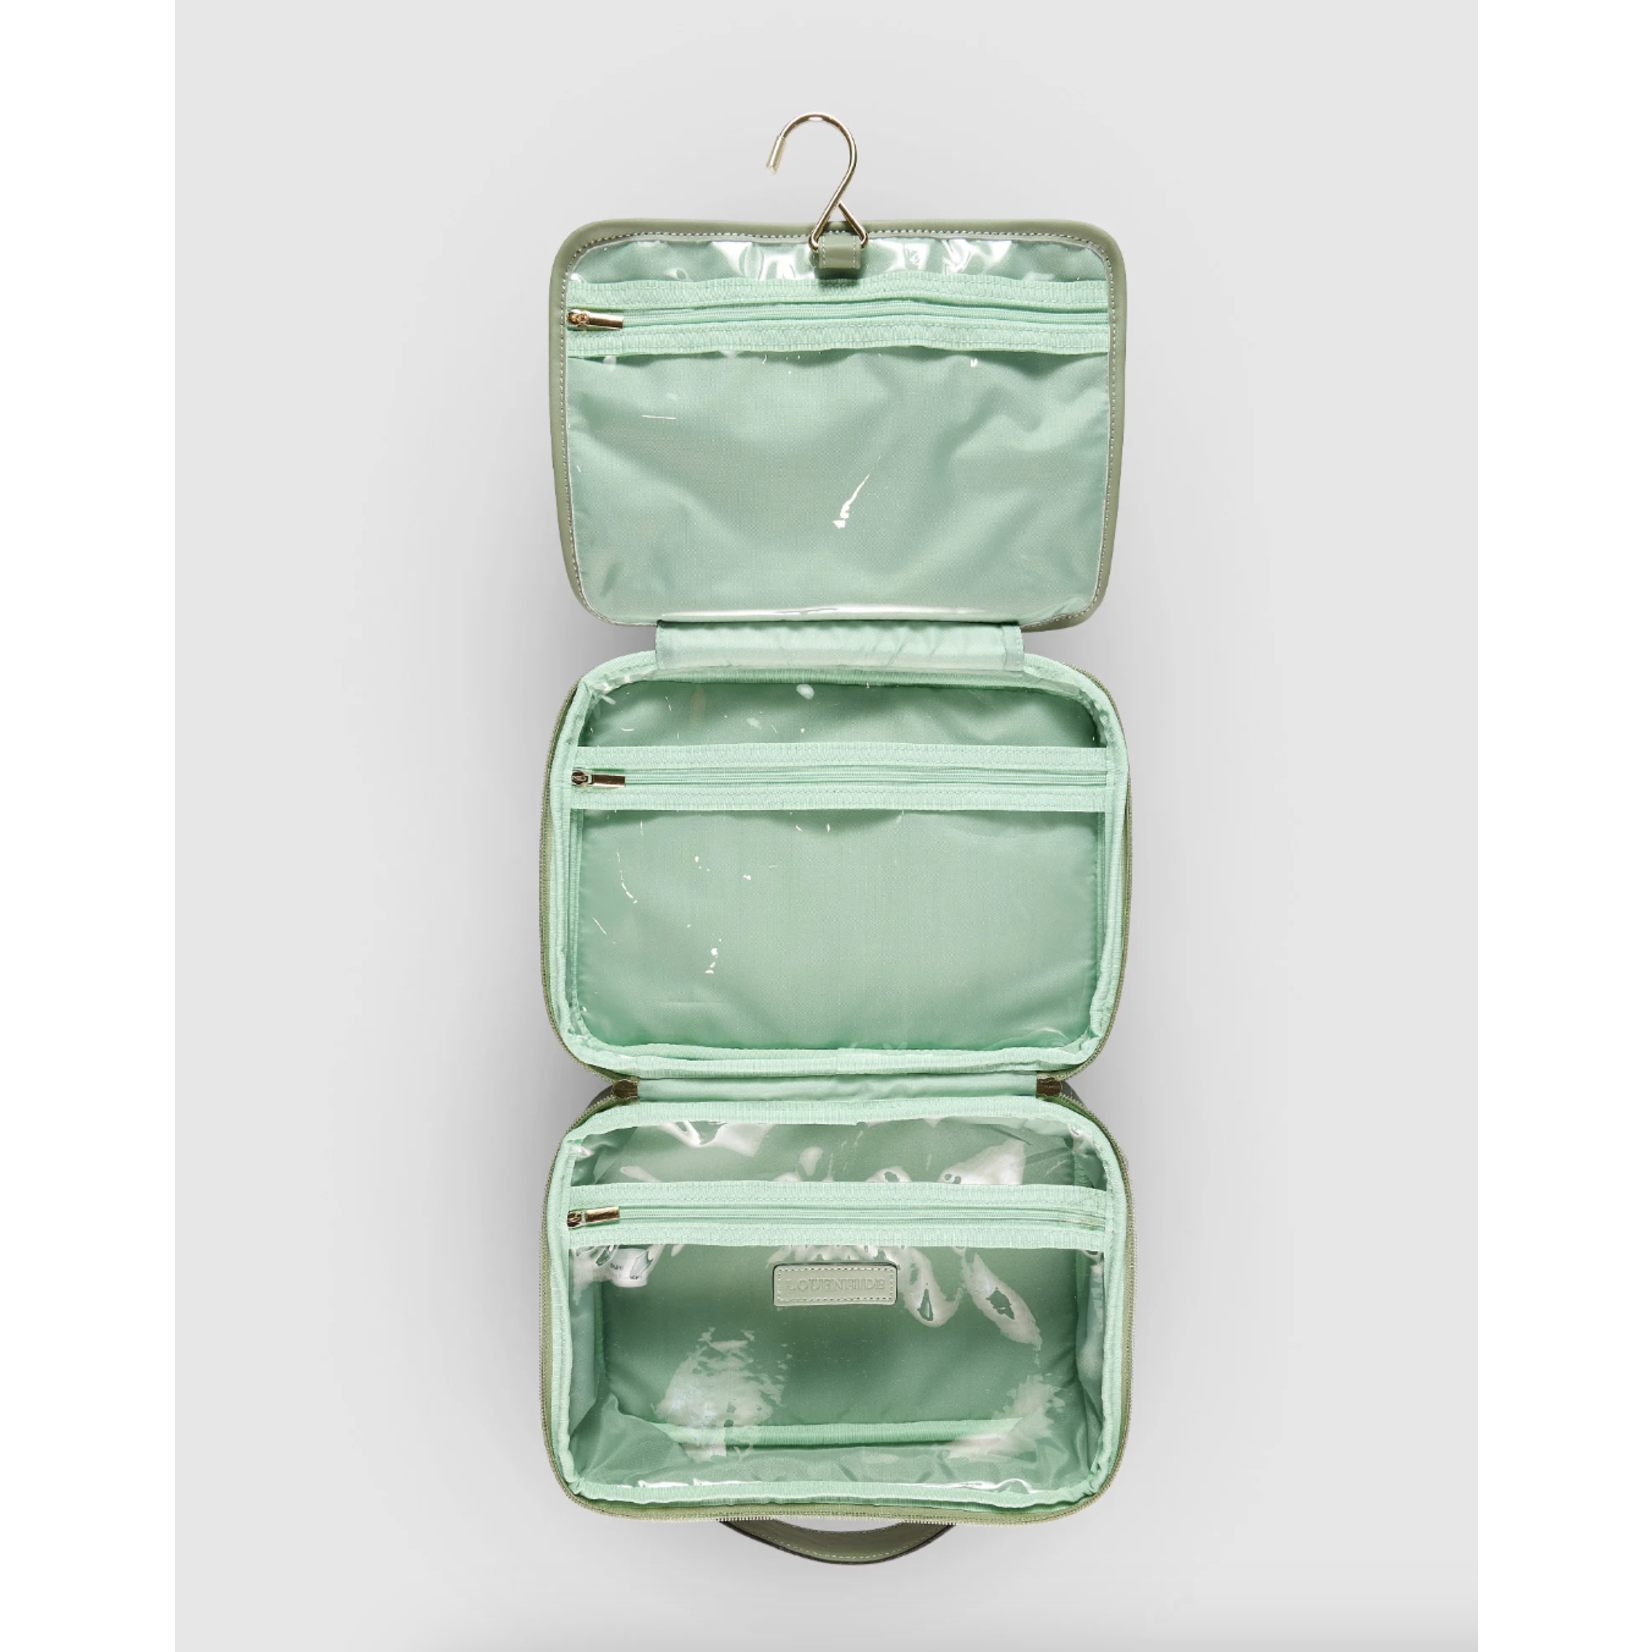 Louenhide Maggie Hanging Toiletry Case